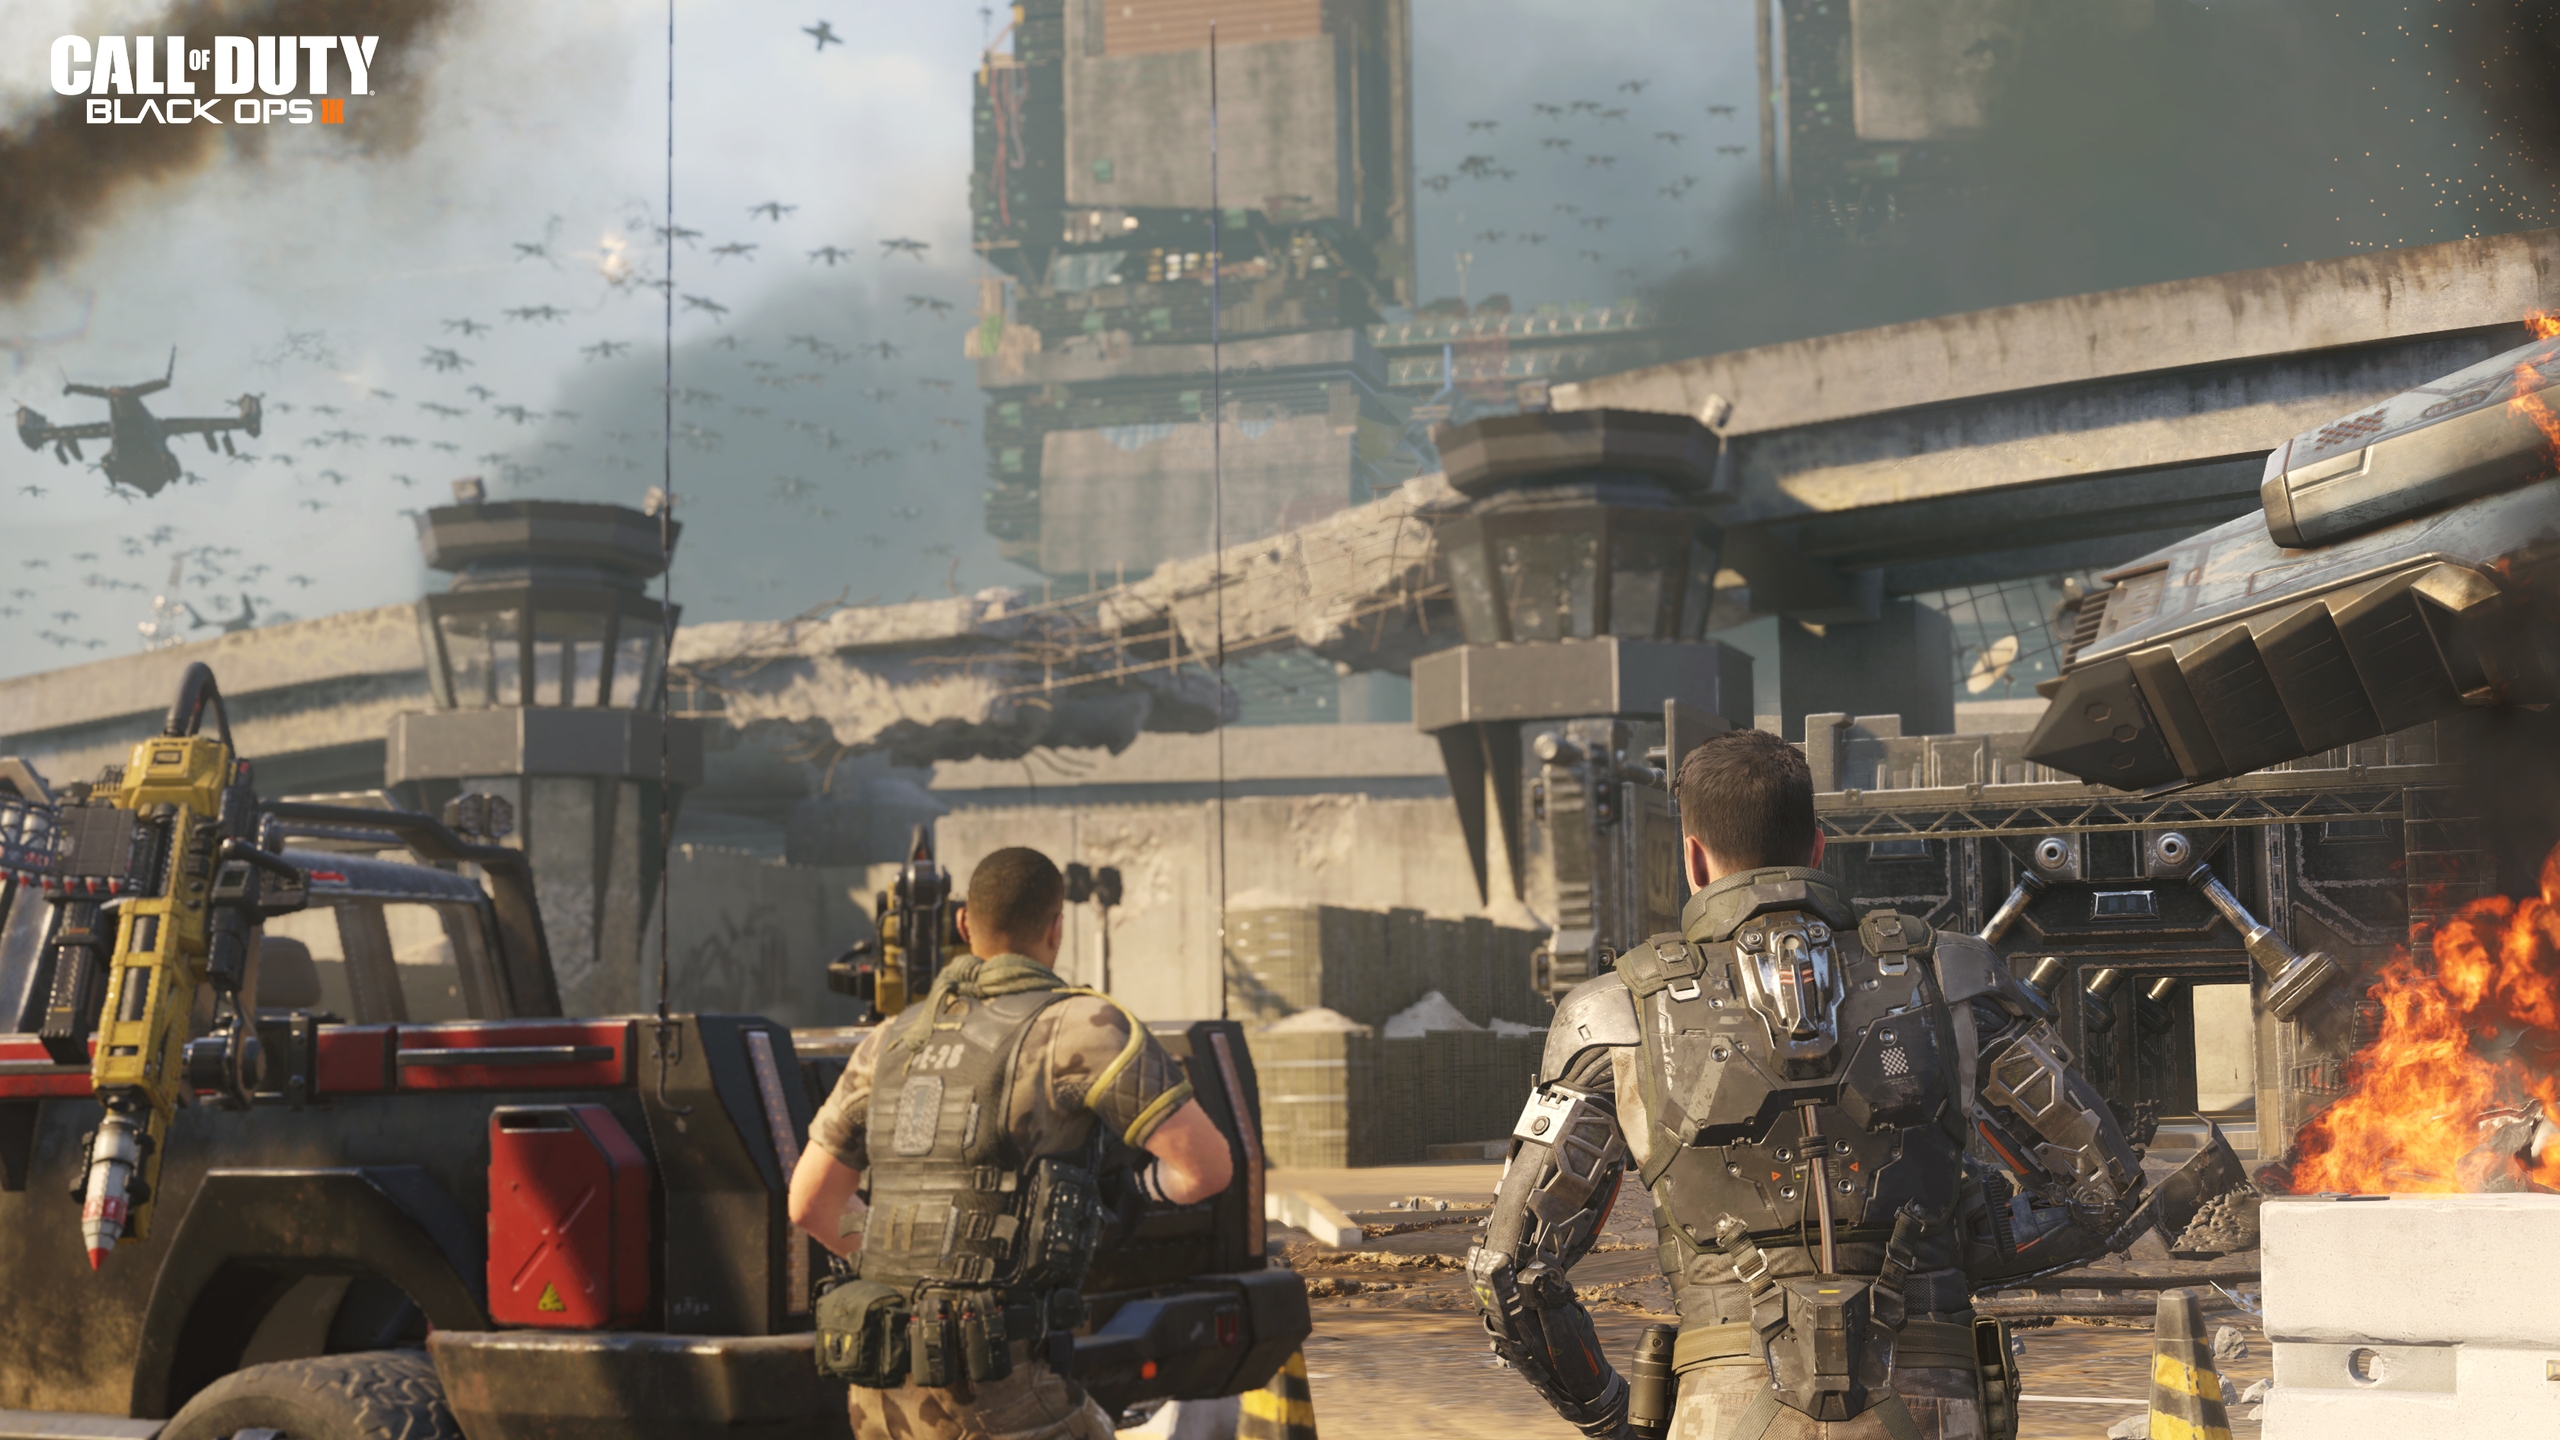 Call of Duty Black Ops 3 Ramses Station Under Siege for 2560x1440 HDTV resolution